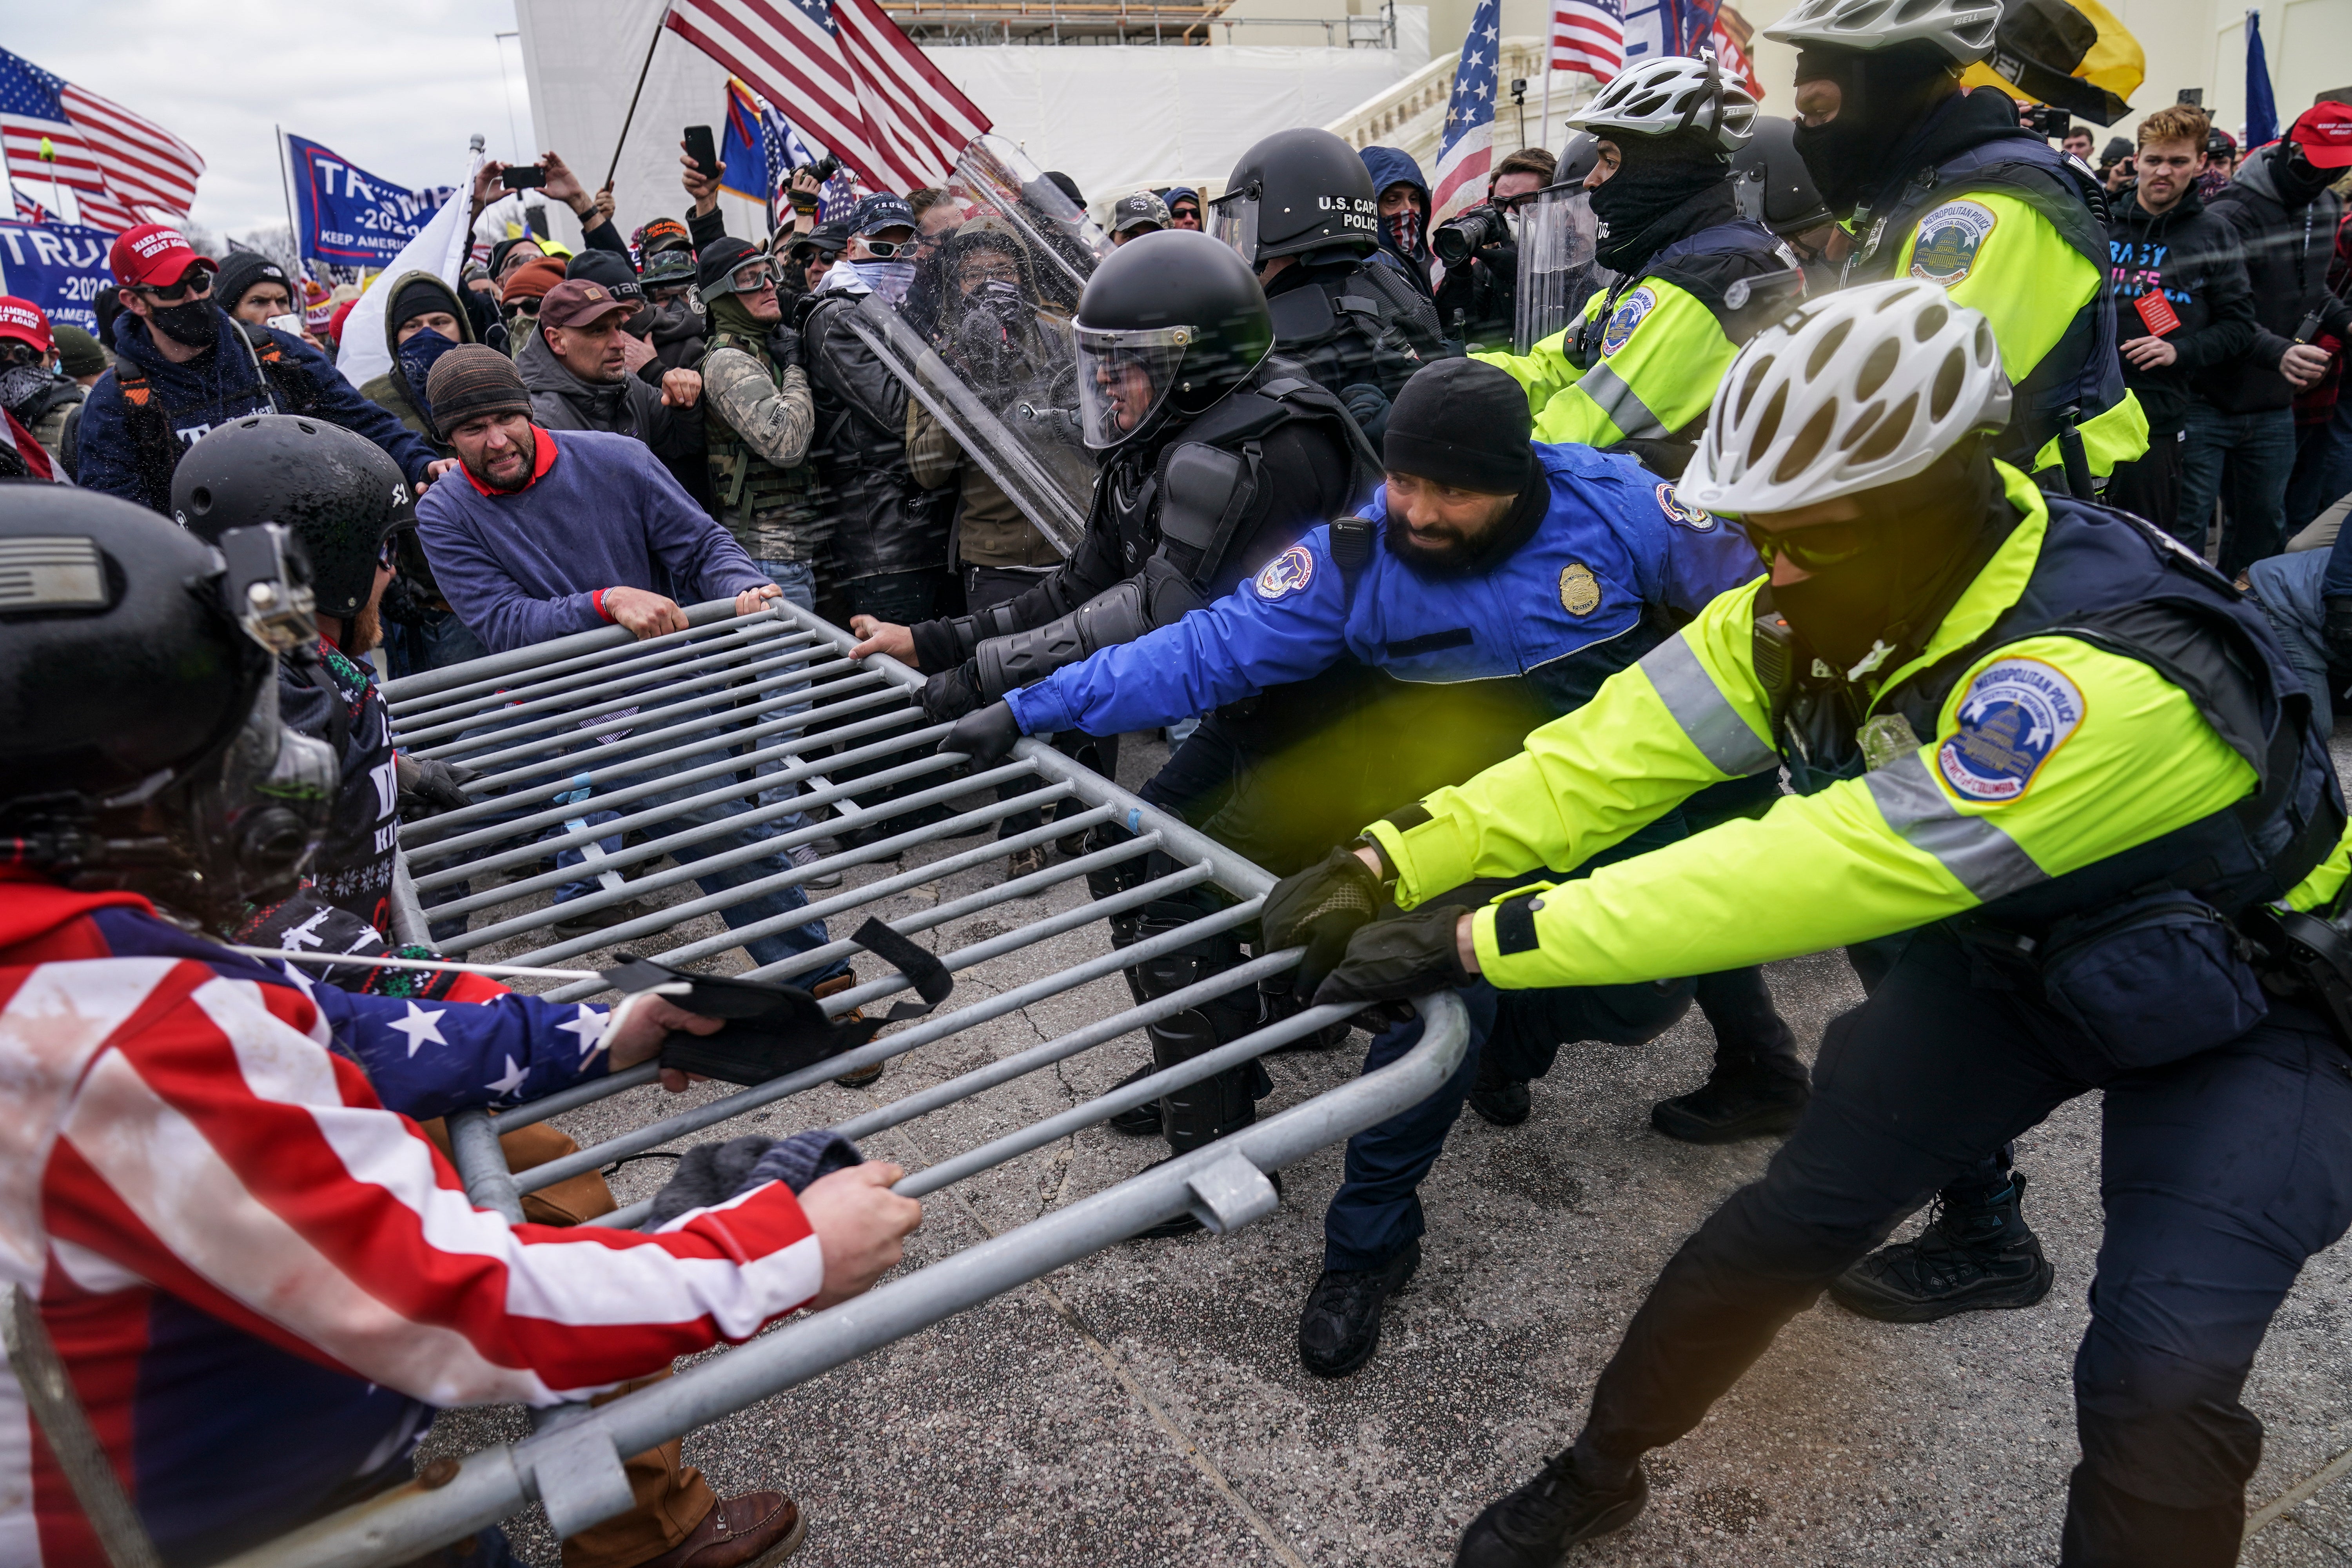 Rioters try to break through a police barrier at the Capitol in Washington, on Jan. 6, 2021.